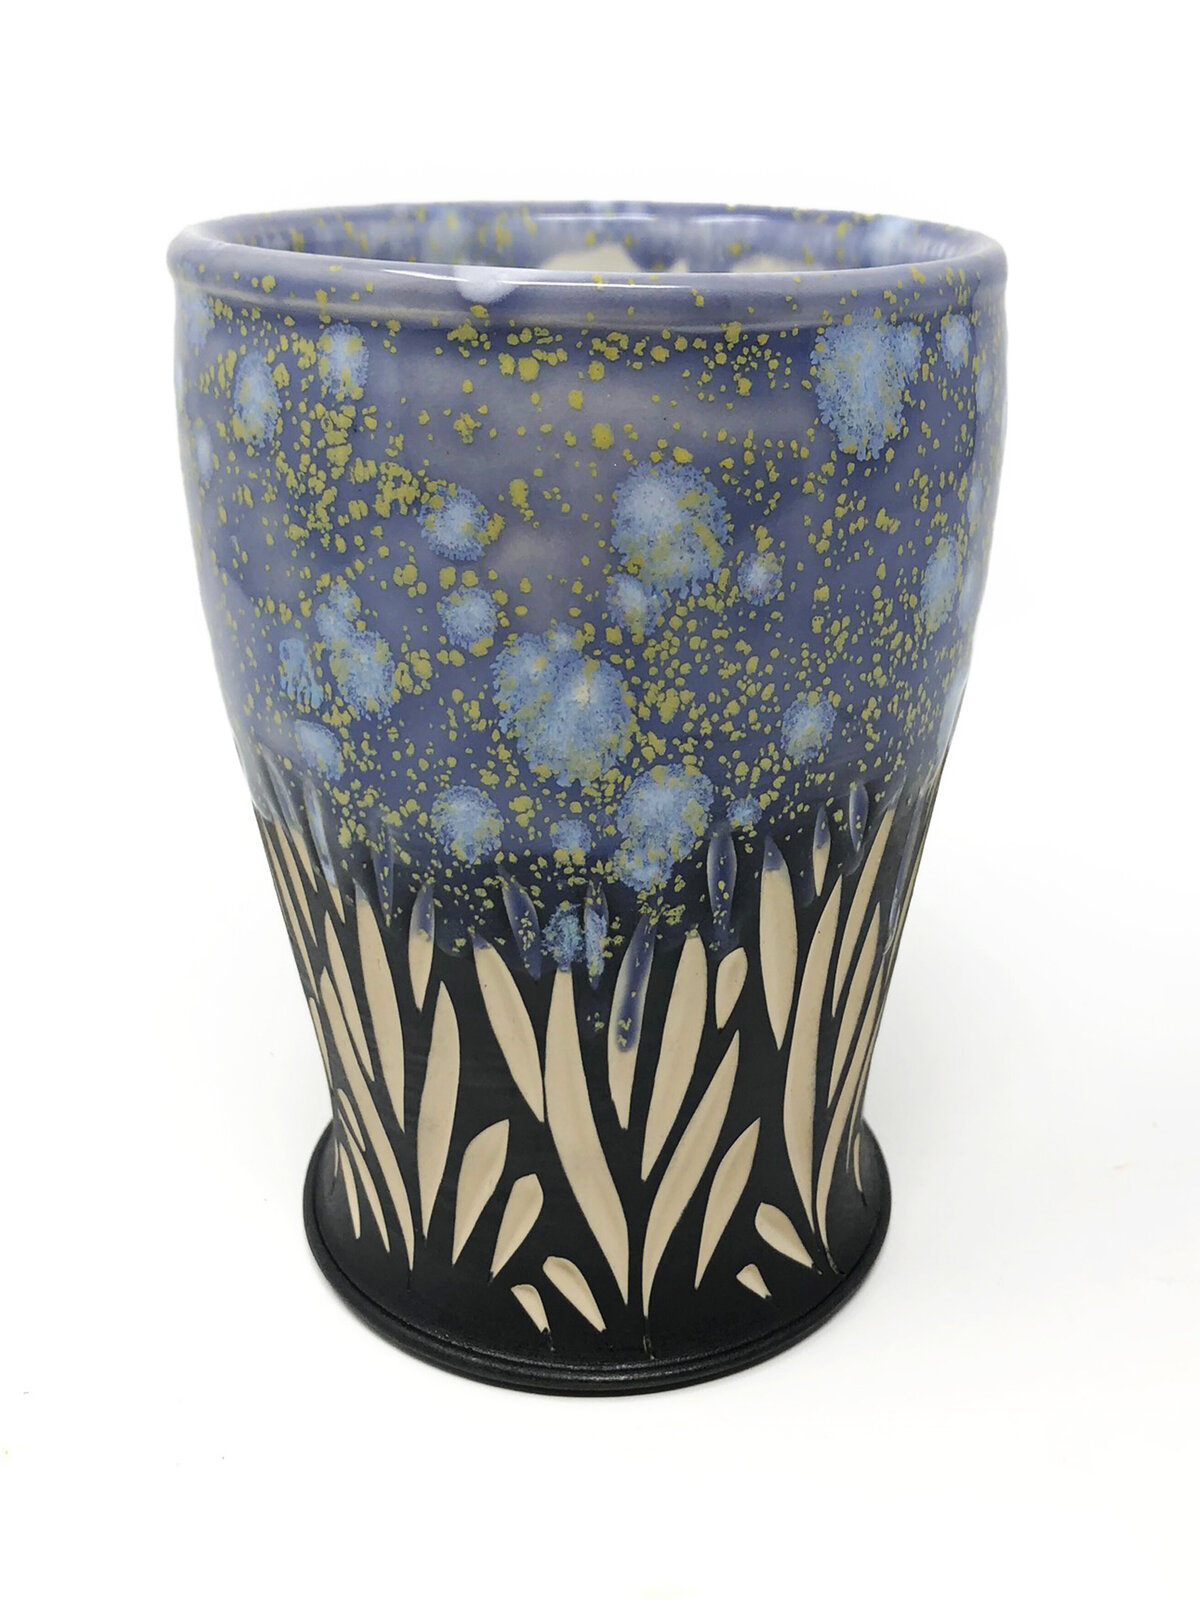 liz-allen-pottery-hand-carved-and-glazed-34